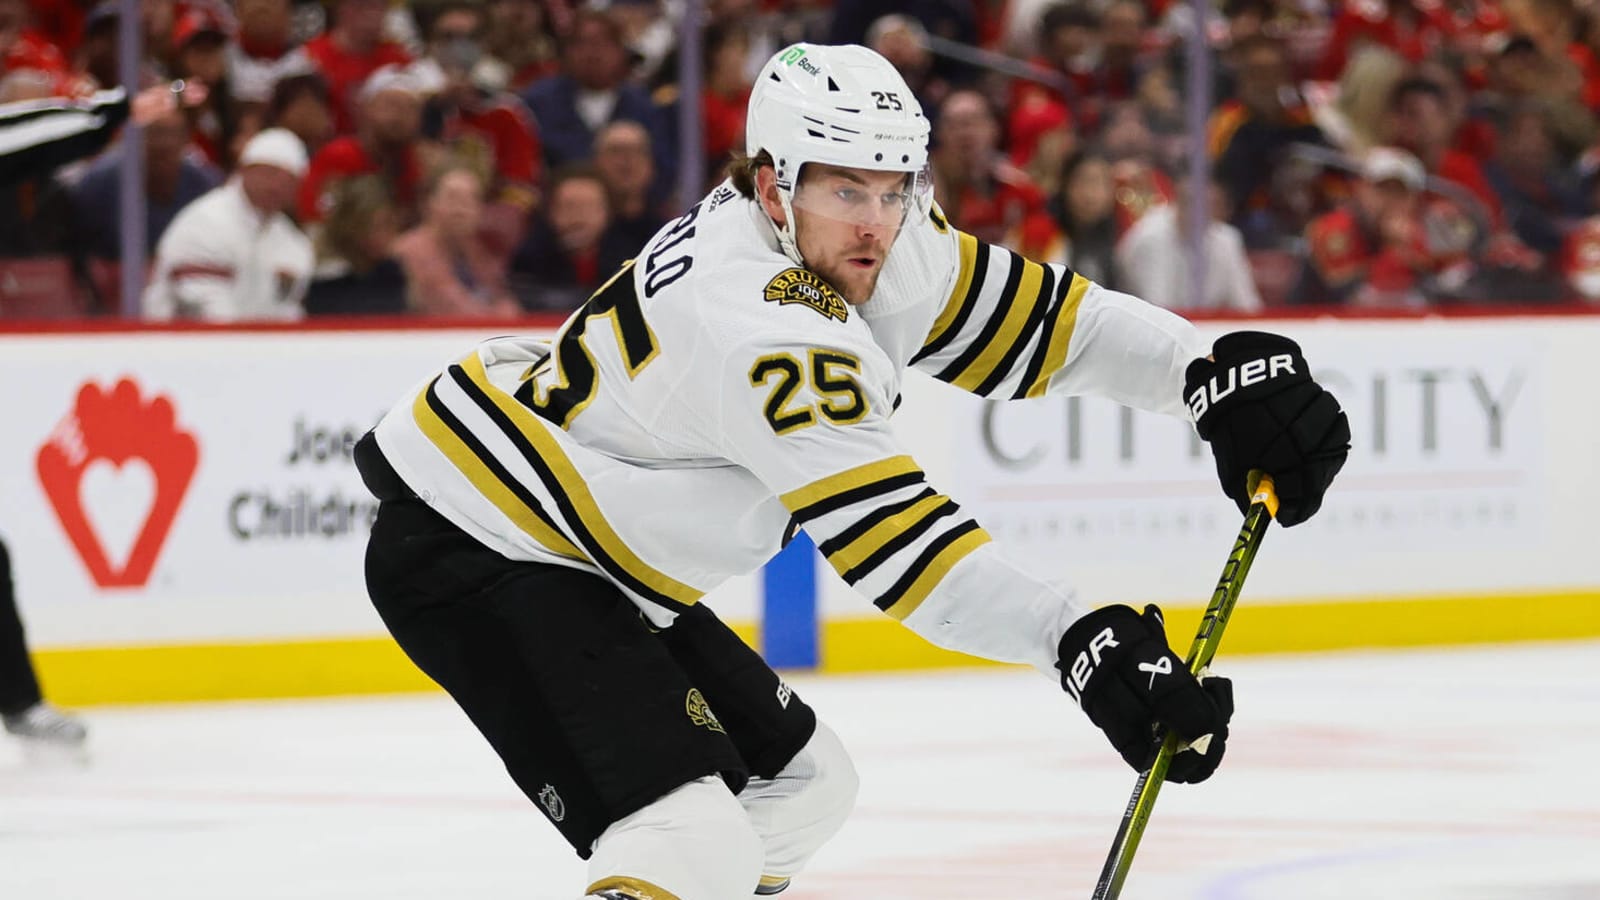 Watch: New dad Brandon Carlo scores for Bruins